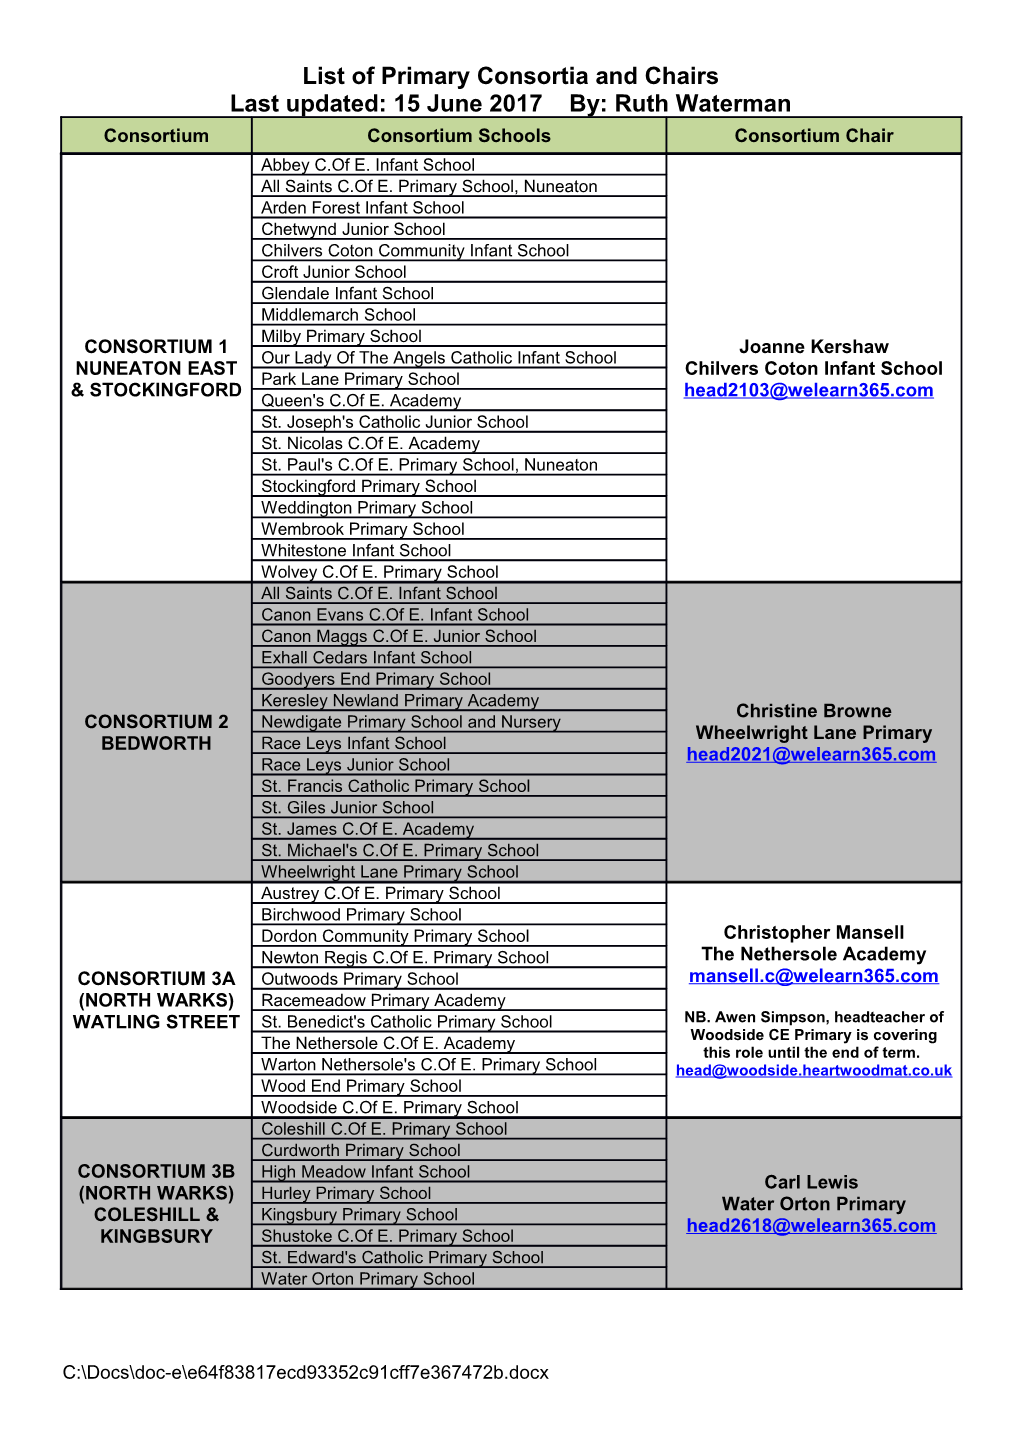 List of Primary Consortia and Chairs